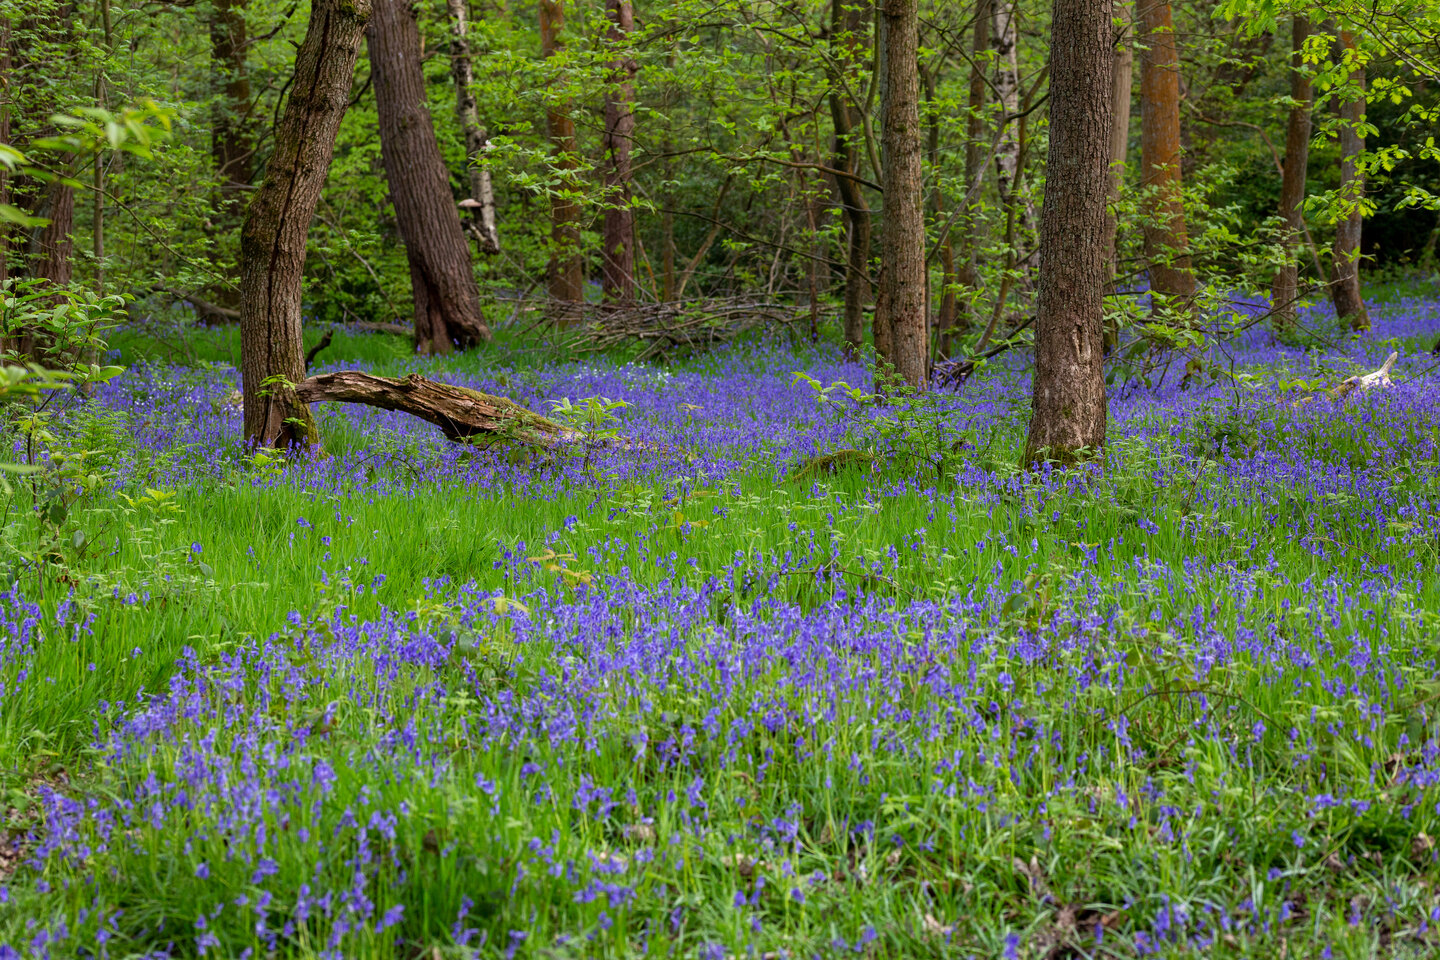 Student Accommodation in Ecclesall - bluebells in Ecclesall Woods